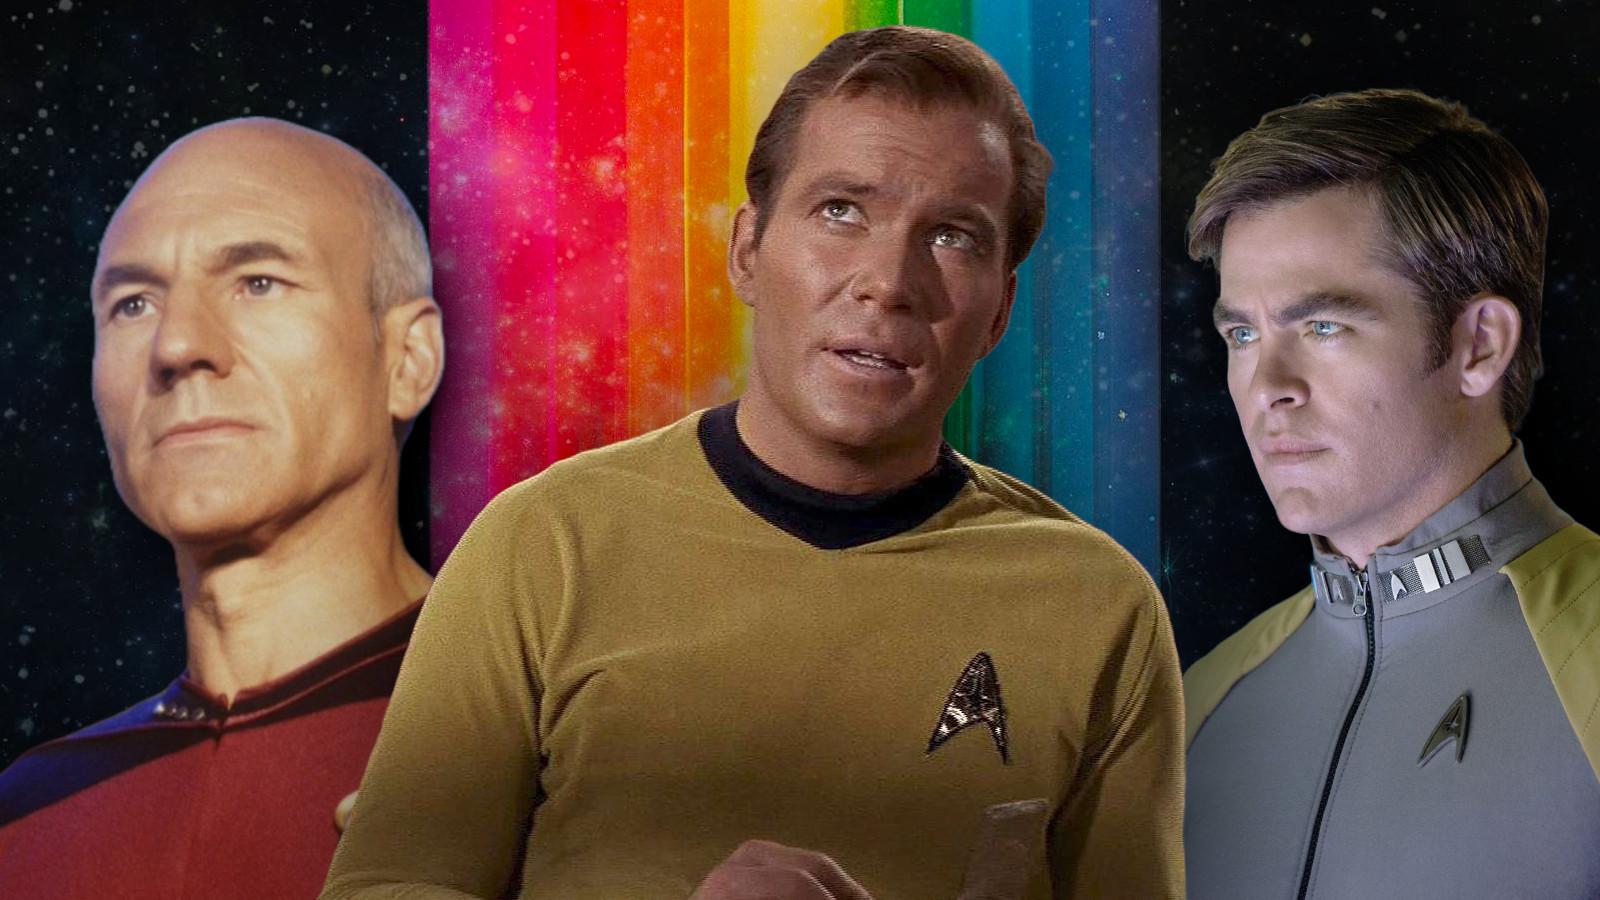 Patrick Stewart, William Shatner, and Chris Pine in their respective roles in the Star Trek timeline